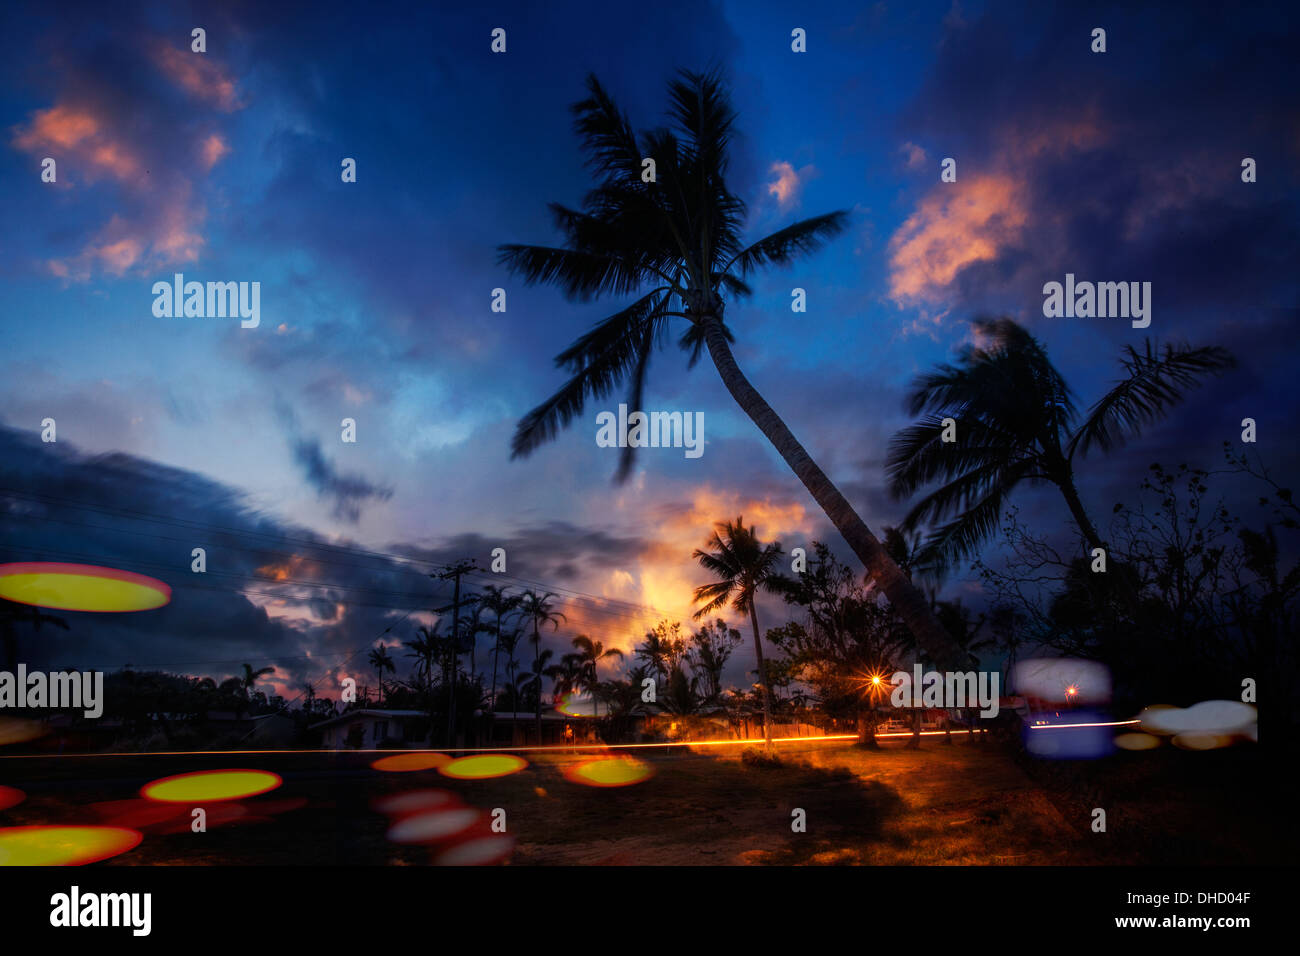 A color landscape photograph of palm trees with car light trails shot at dusk. Stock Photo